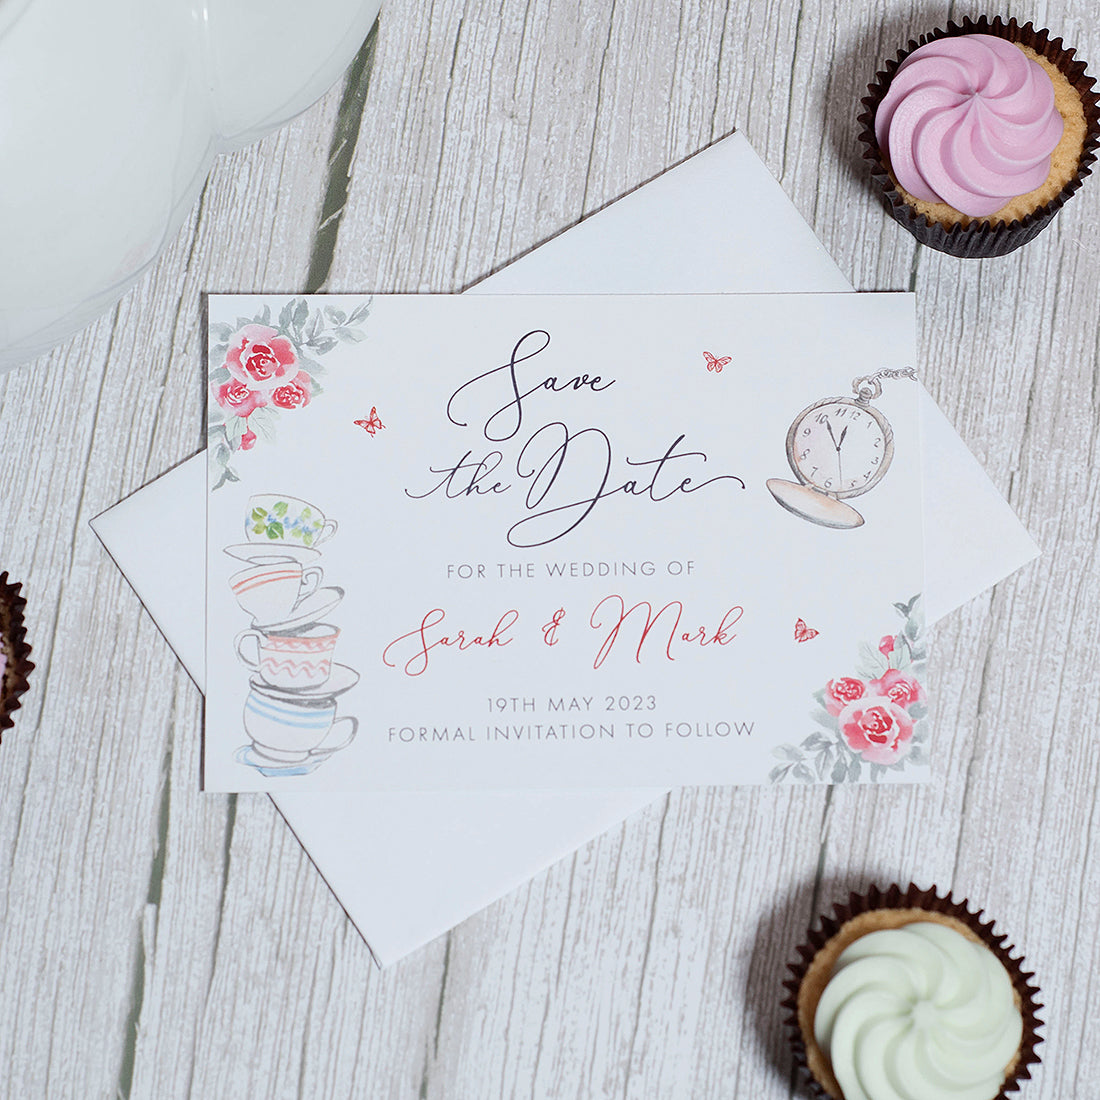 Vintage Tea Party Save the Date Card